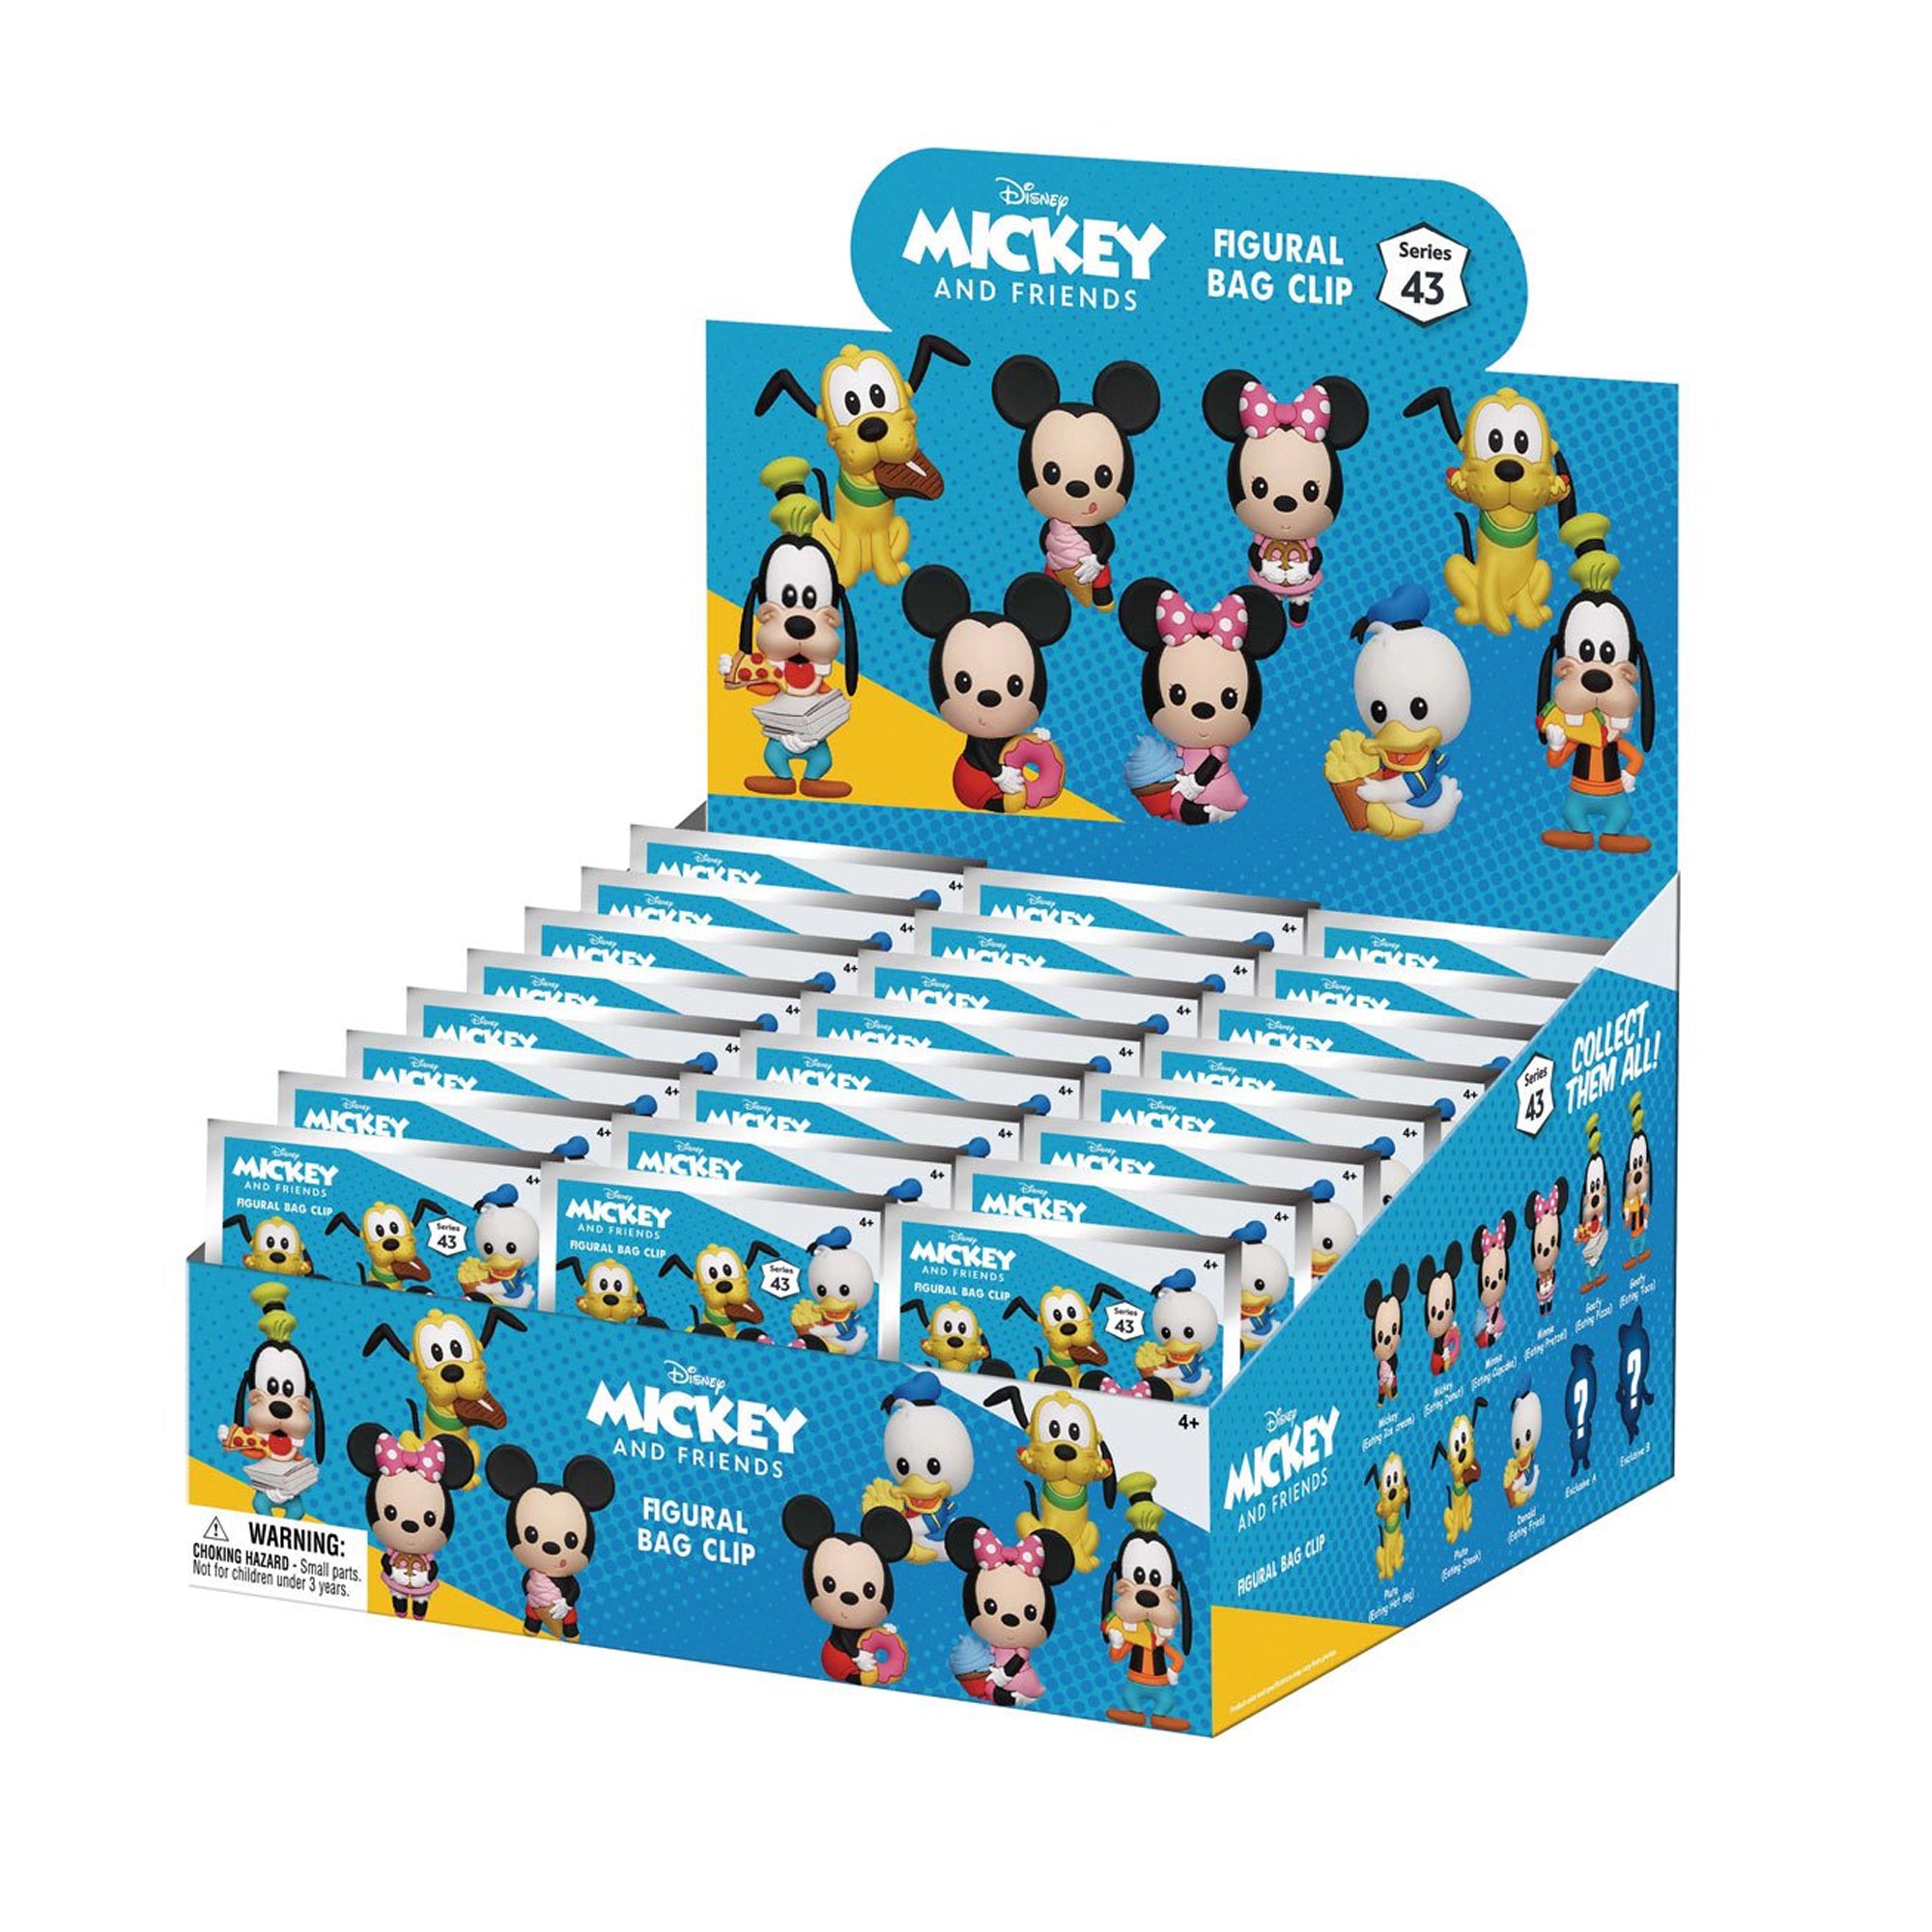 Disney Mickey and Friends with Food Collectible 3D Bag Clip Series 43 - Mystery Bag